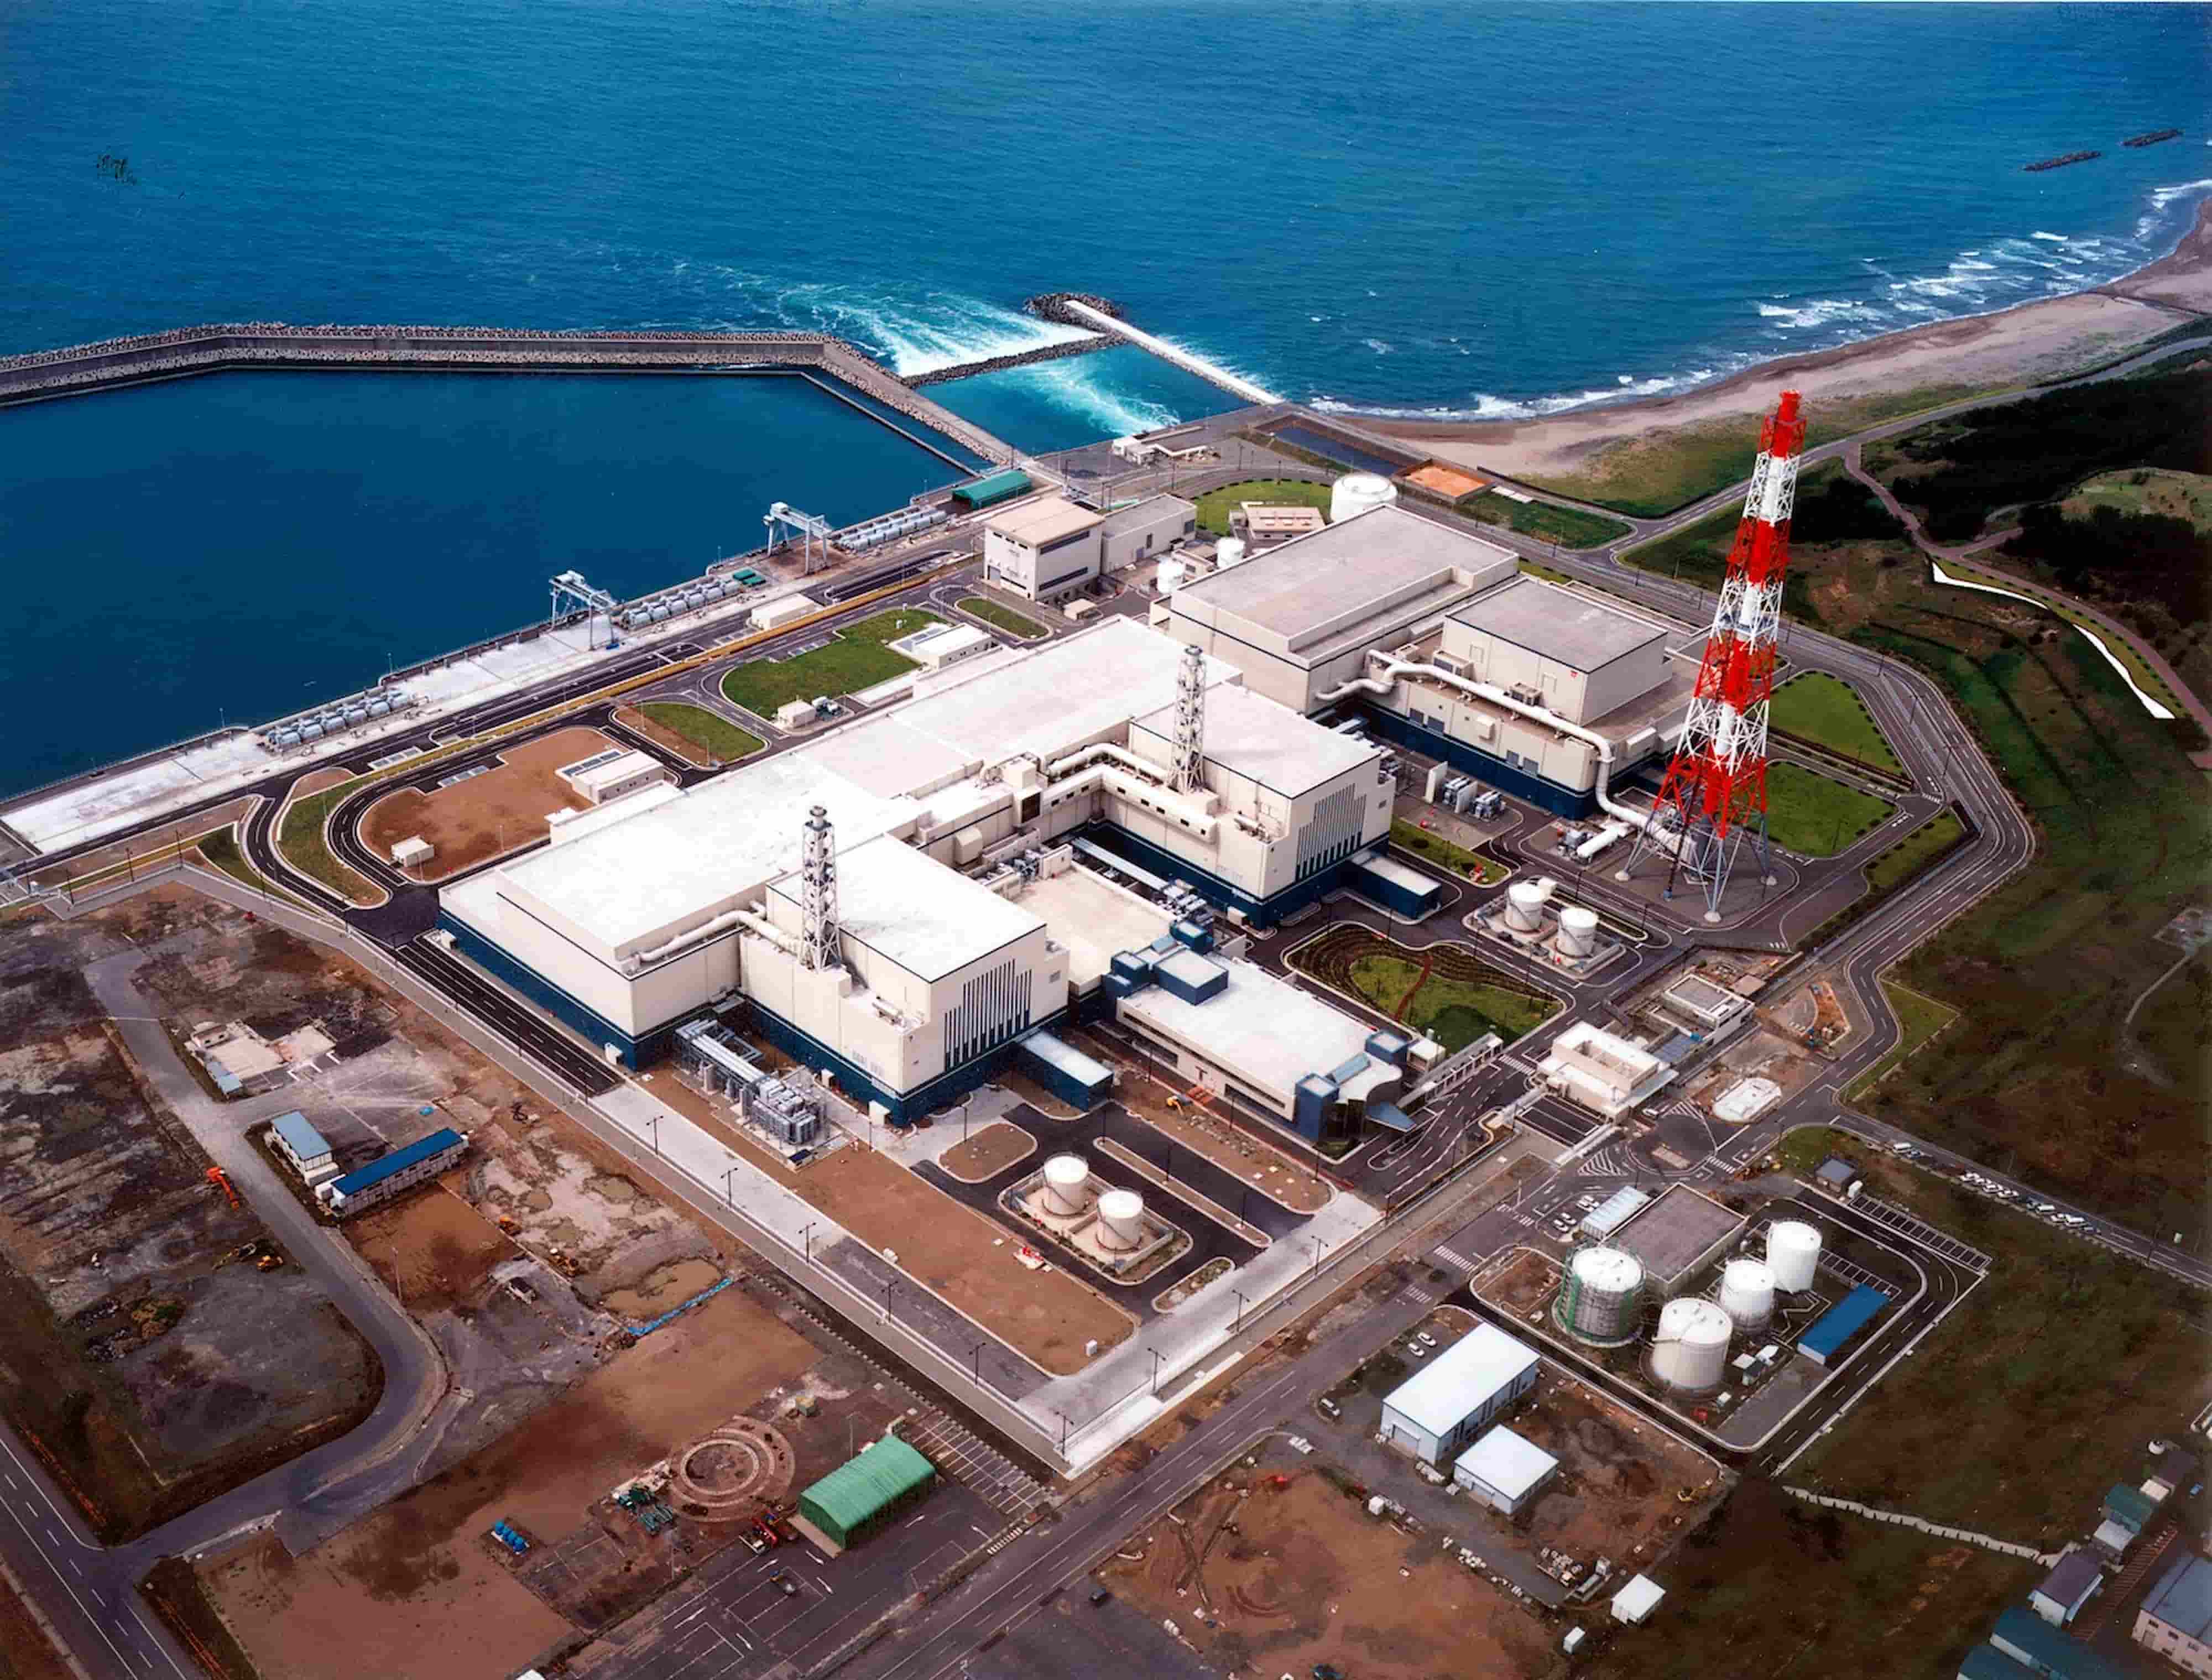 Japan Lifts Operational Ban on World's Biggest Nuclear Plant